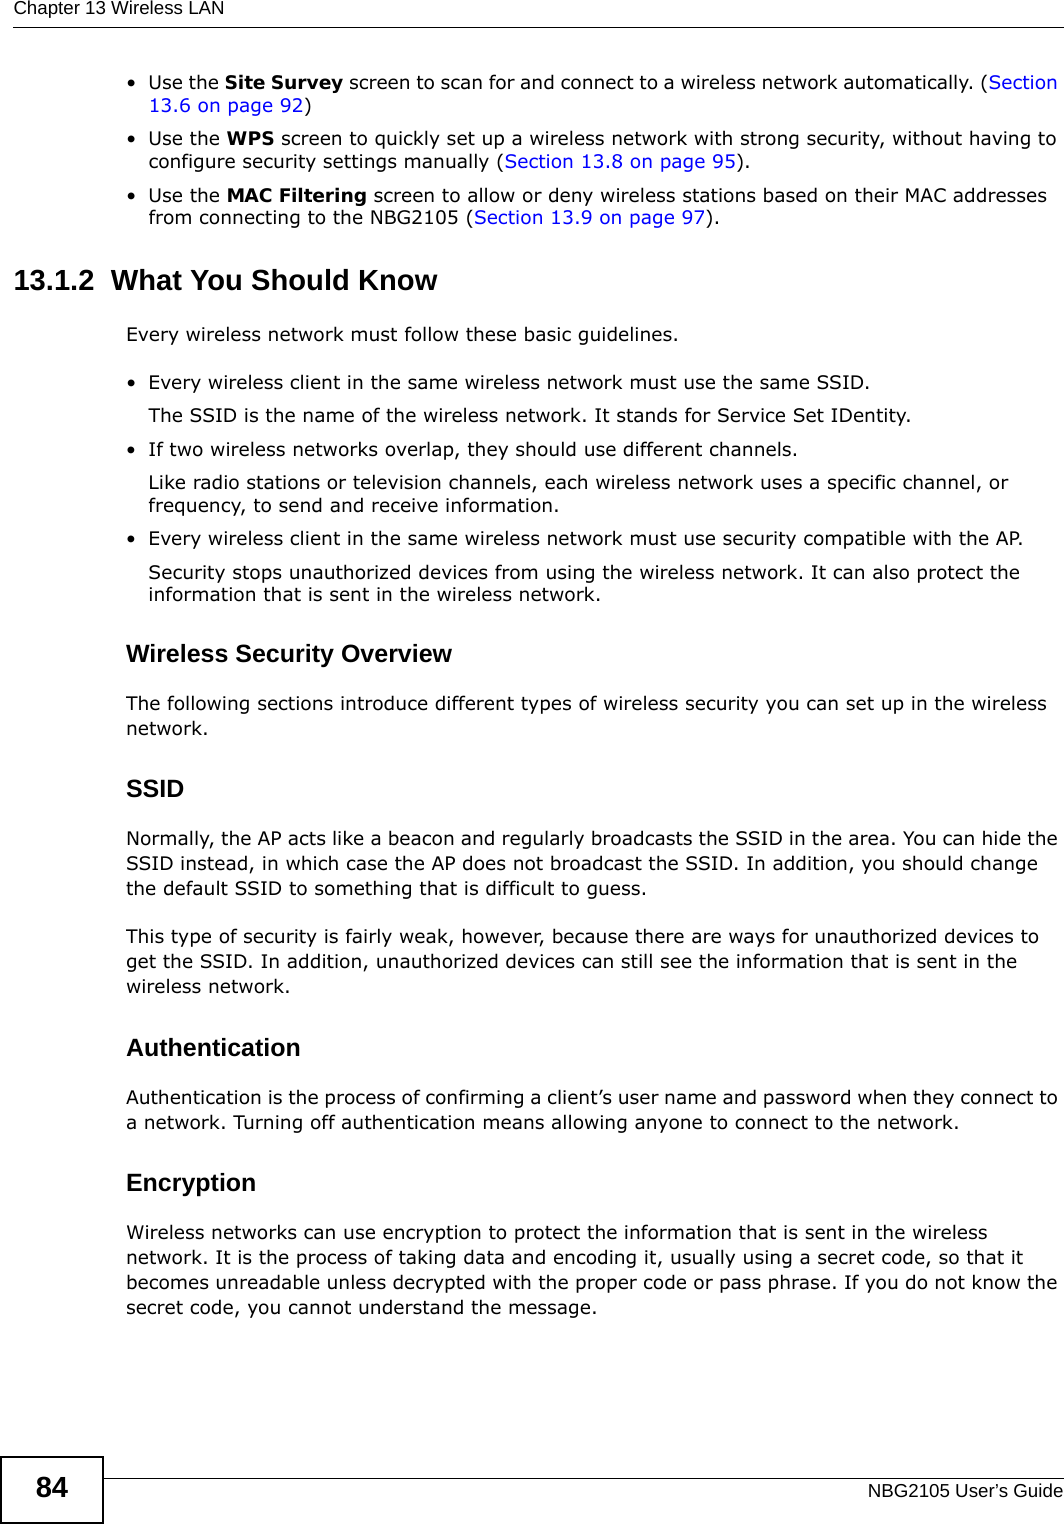 Chapter 13 Wireless LANNBG2105 User’s Guide84•Use the Site Survey screen to scan for and connect to a wireless network automatically. (Section 13.6 on page 92)•Use the WPS screen to quickly set up a wireless network with strong security, without having to configure security settings manually (Section 13.8 on page 95).•Use the MAC Filtering screen to allow or deny wireless stations based on their MAC addresses from connecting to the NBG2105 (Section 13.9 on page 97).13.1.2  What You Should KnowEvery wireless network must follow these basic guidelines.• Every wireless client in the same wireless network must use the same SSID.The SSID is the name of the wireless network. It stands for Service Set IDentity.• If two wireless networks overlap, they should use different channels.Like radio stations or television channels, each wireless network uses a specific channel, or frequency, to send and receive information.• Every wireless client in the same wireless network must use security compatible with the AP.Security stops unauthorized devices from using the wireless network. It can also protect the information that is sent in the wireless network.Wireless Security OverviewThe following sections introduce different types of wireless security you can set up in the wireless network.SSIDNormally, the AP acts like a beacon and regularly broadcasts the SSID in the area. You can hide the SSID instead, in which case the AP does not broadcast the SSID. In addition, you should change the default SSID to something that is difficult to guess.This type of security is fairly weak, however, because there are ways for unauthorized devices to get the SSID. In addition, unauthorized devices can still see the information that is sent in the wireless network.AuthenticationAuthentication is the process of confirming a client’s user name and password when they connect to a network. Turning off authentication means allowing anyone to connect to the network.EncryptionWireless networks can use encryption to protect the information that is sent in the wireless network. It is the process of taking data and encoding it, usually using a secret code, so that it becomes unreadable unless decrypted with the proper code or pass phrase. If you do not know the secret code, you cannot understand the message.